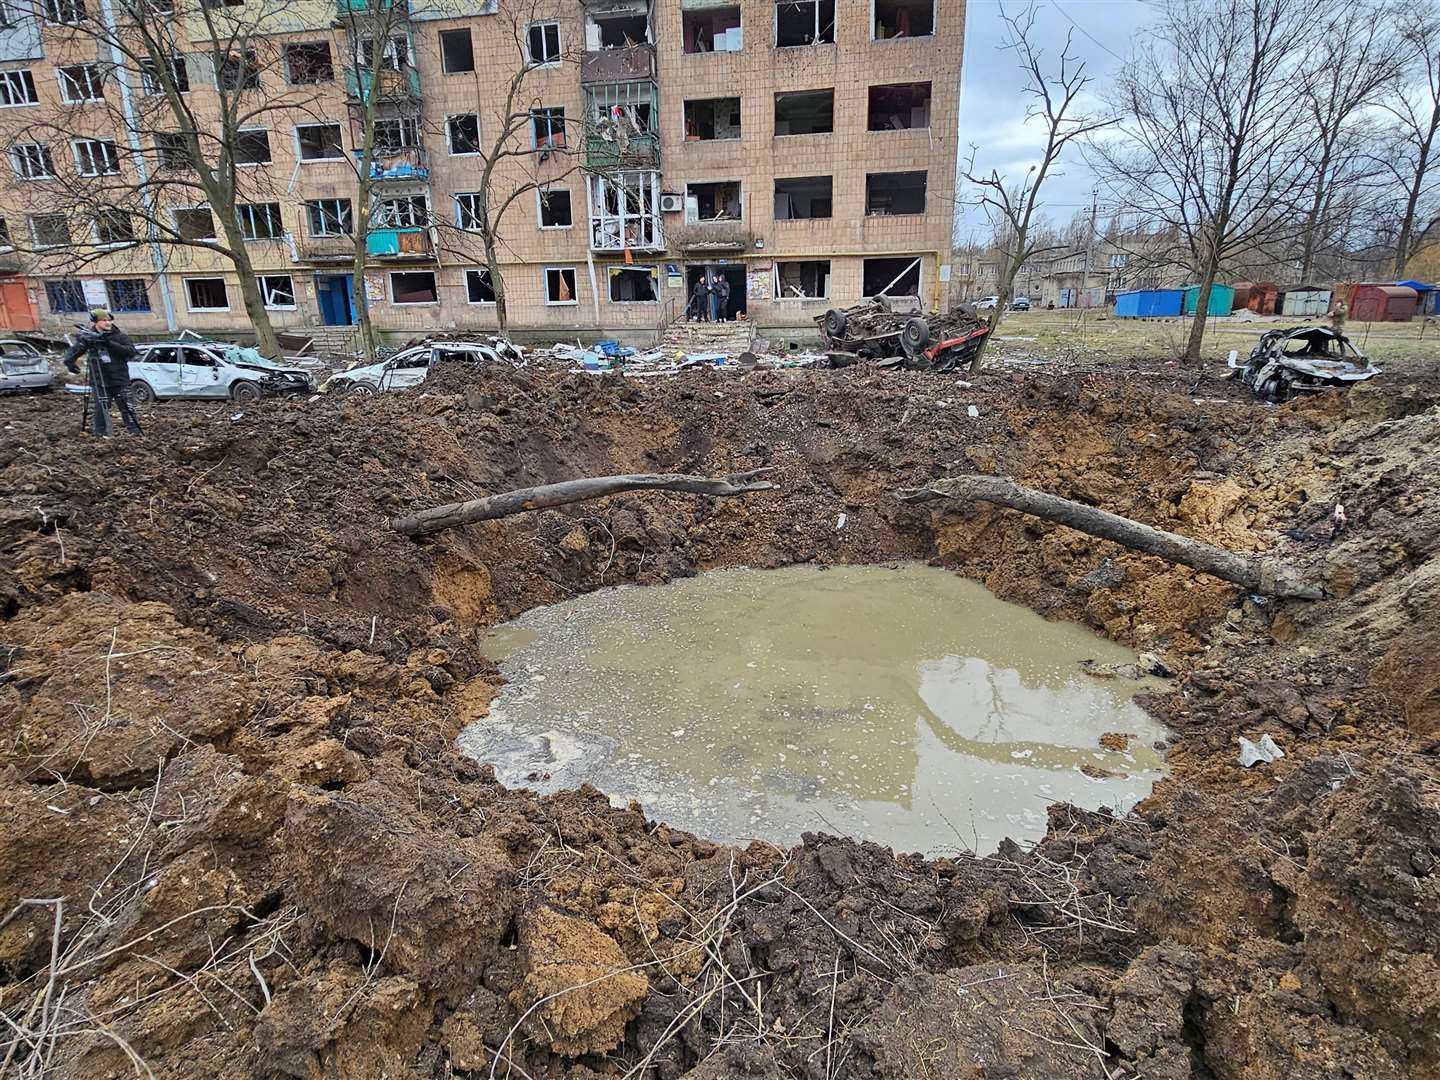 The crater caused by a missile strike near Andrew's hotel.